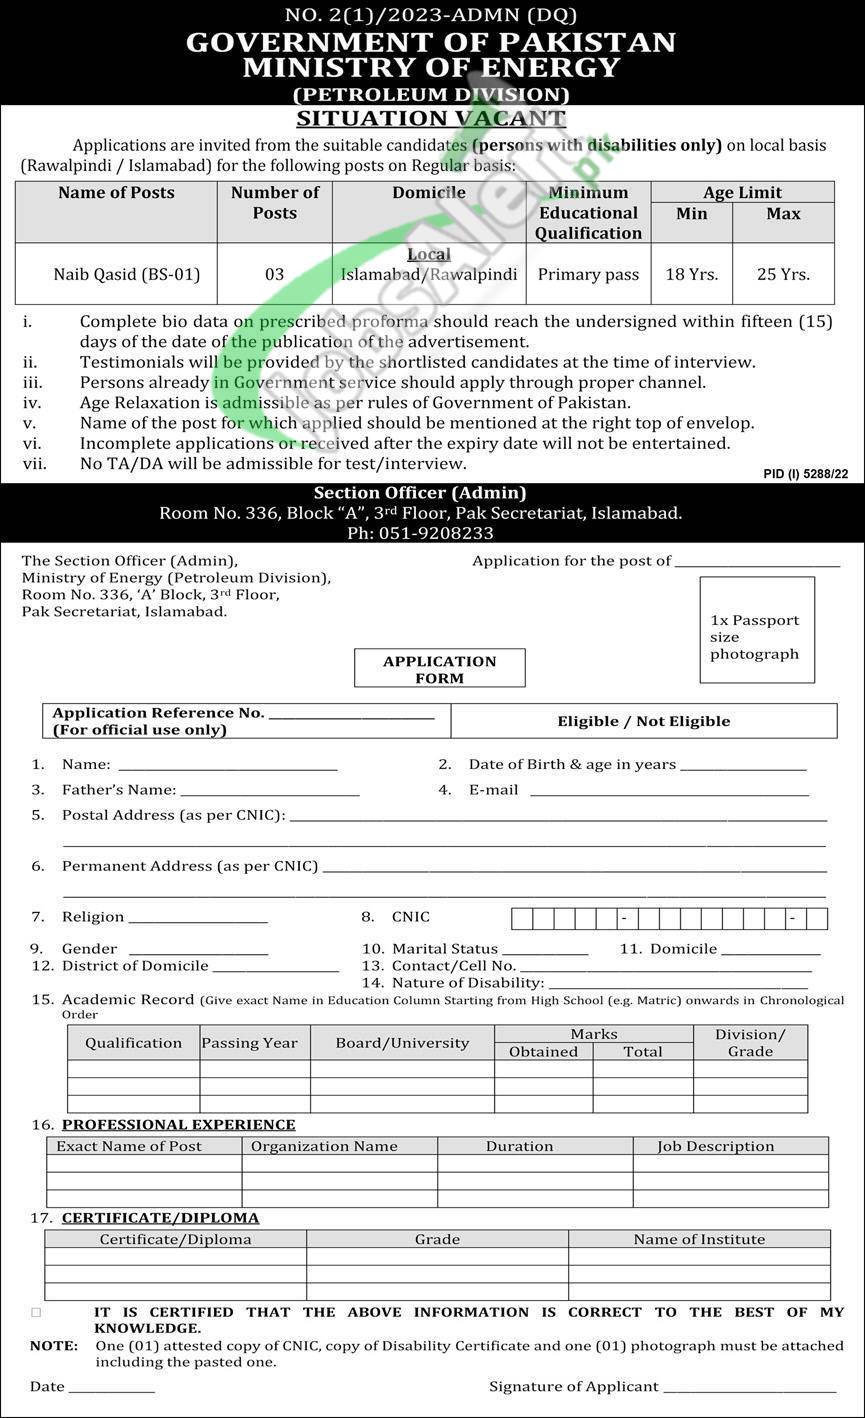 Ministry of Energy Petroleum Division Jobs 2023 Application Form Download